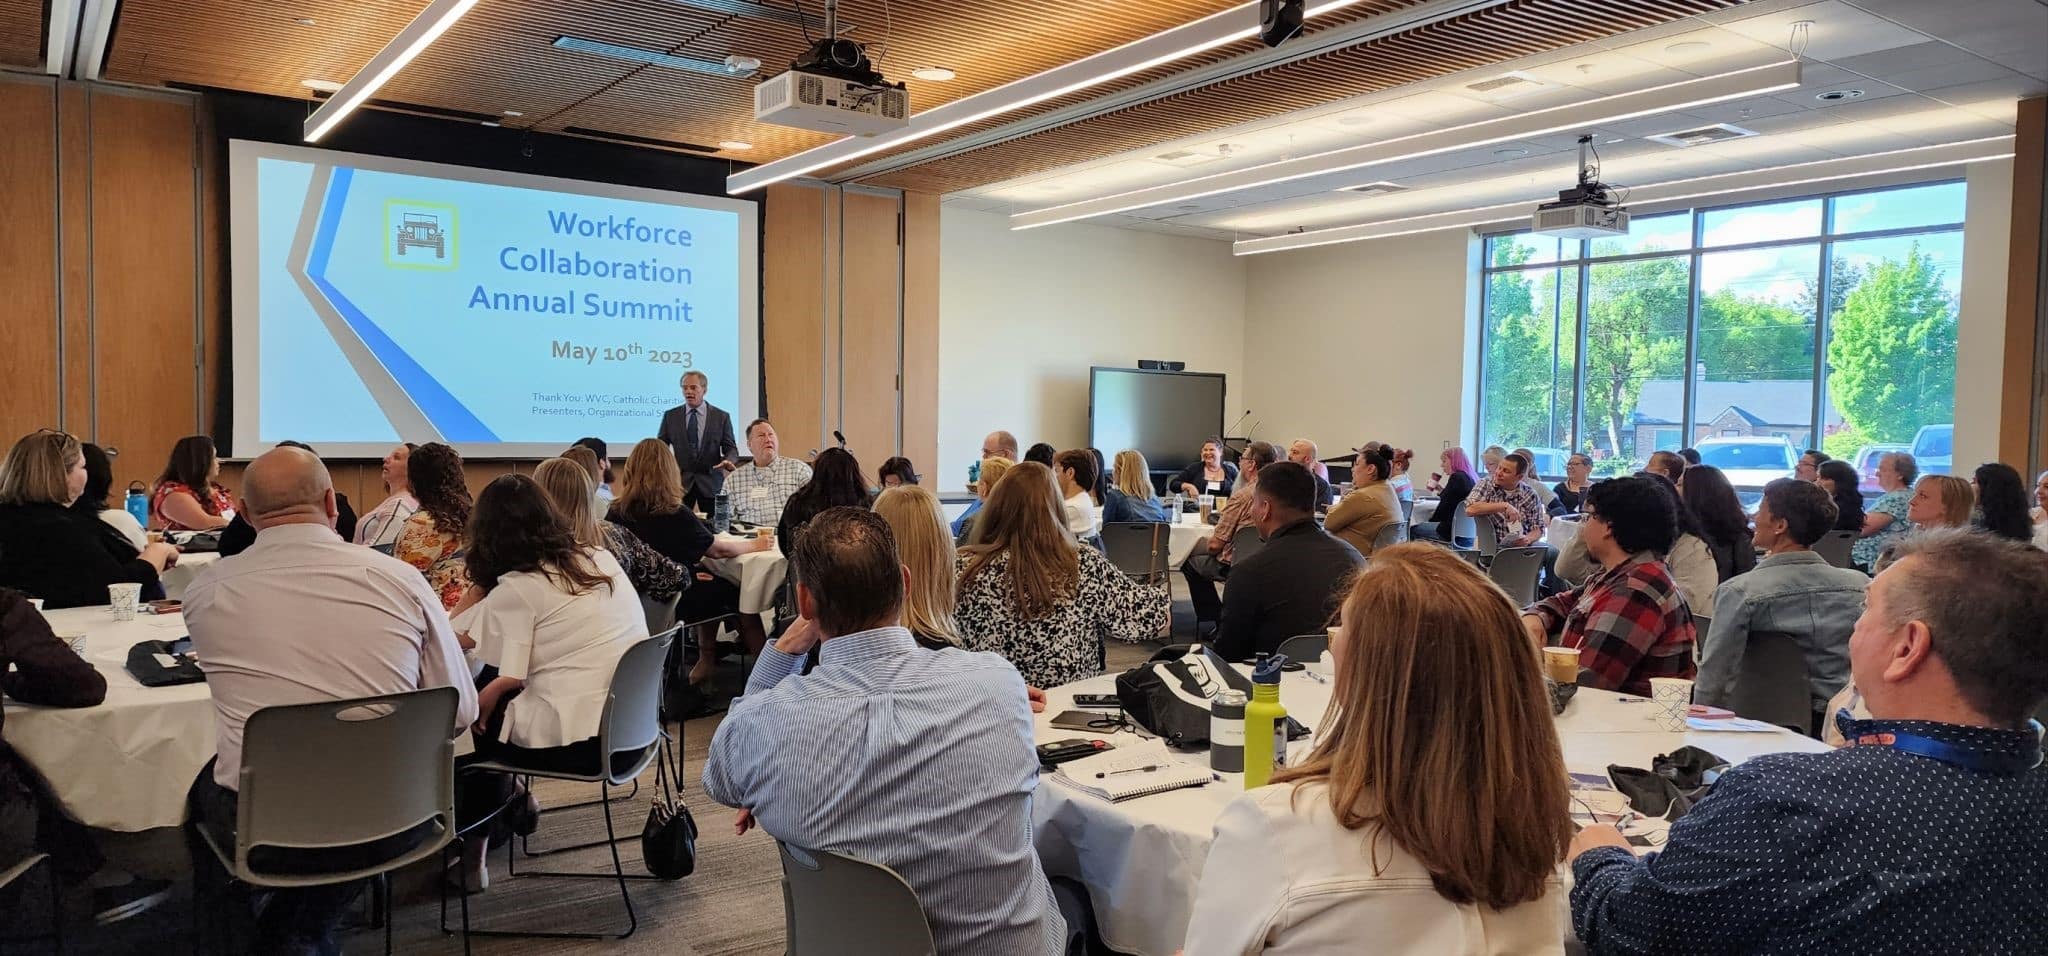 Workforce Collaboration Summit energizes staff and promotes effective customer service